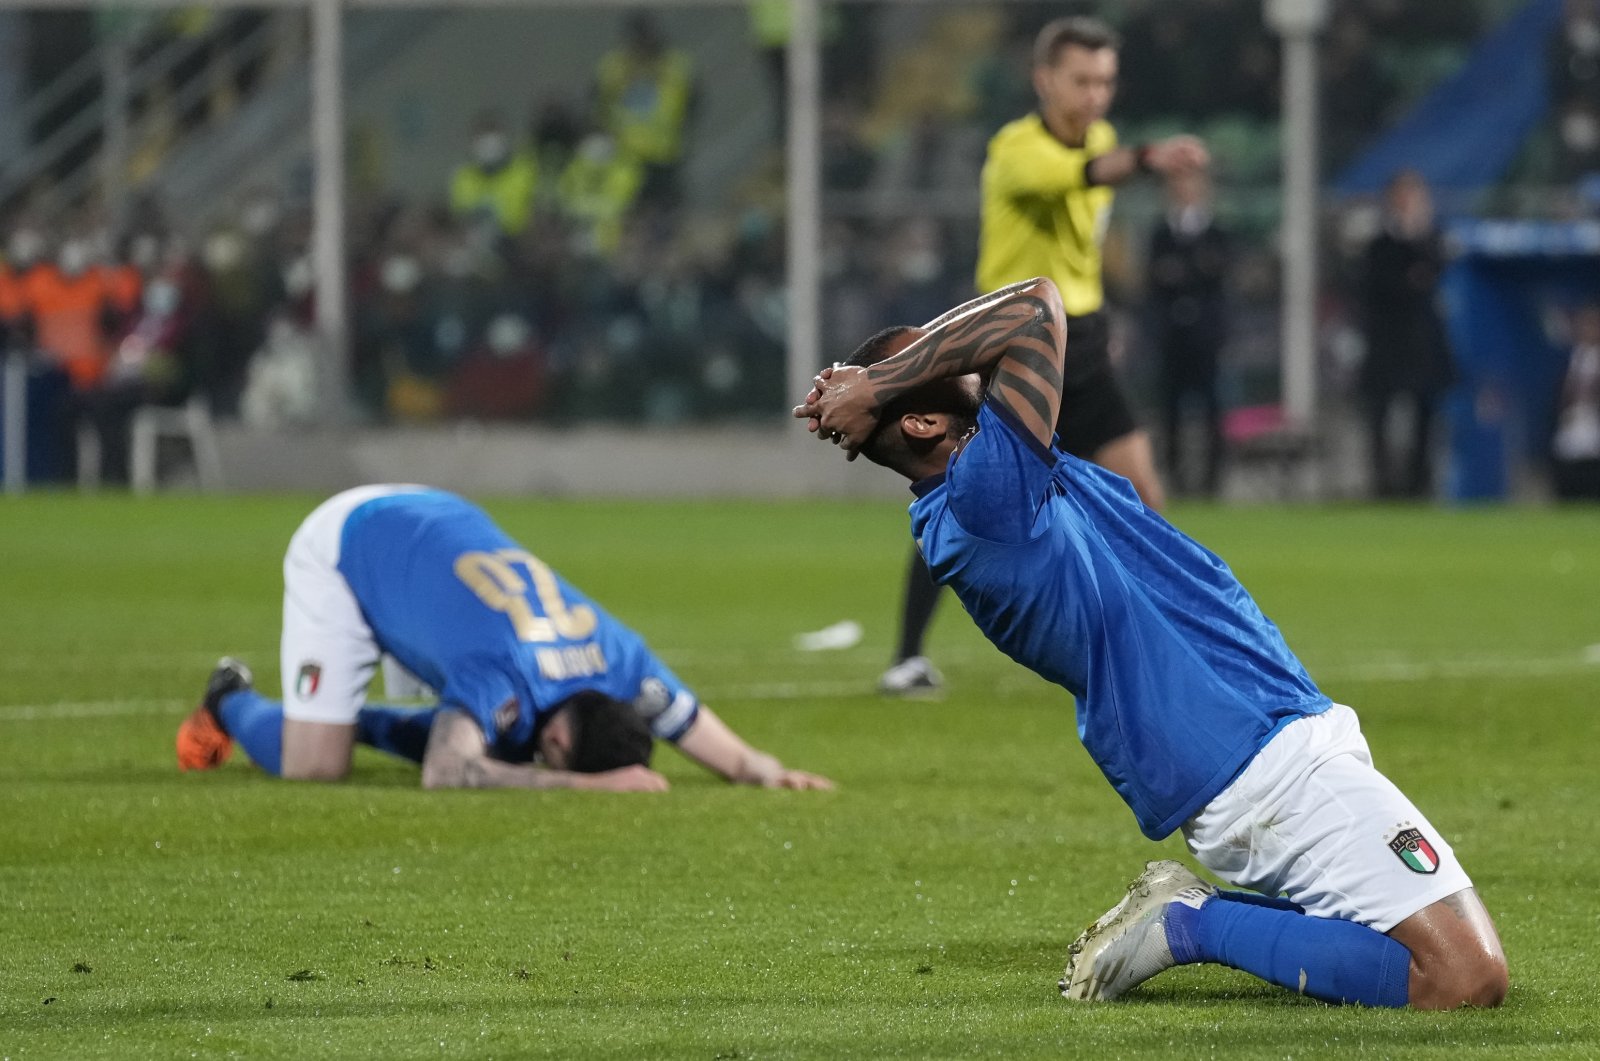 Italy&#039;s Joao Pedro (R) reacts after missing a scoring chance in the World Cup qualifying match against North Macedonia at Renzo Barbera stadium, Palermo, Italy, March 24, 2022. (AP Photo)